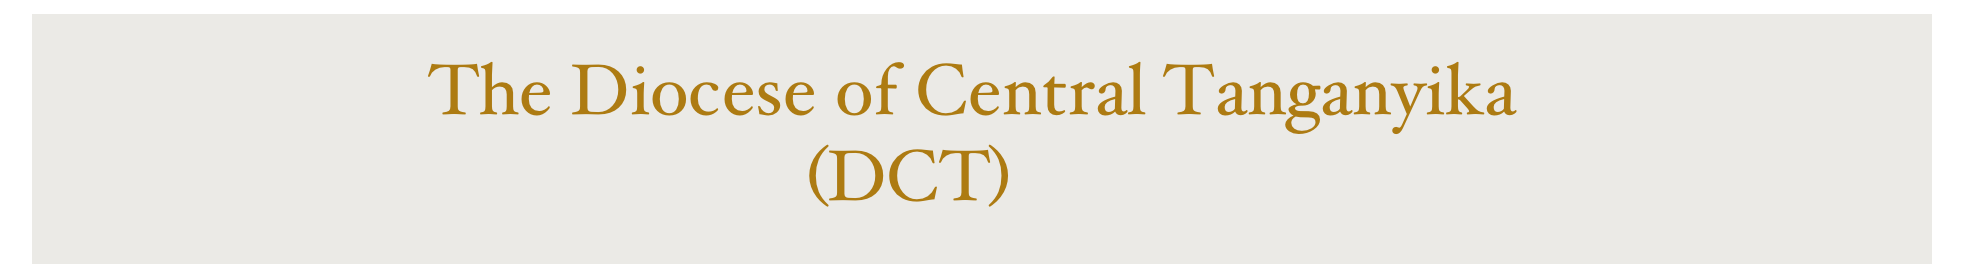 
                      The Diocese of Central Tanganyika 
                                           (DCT)